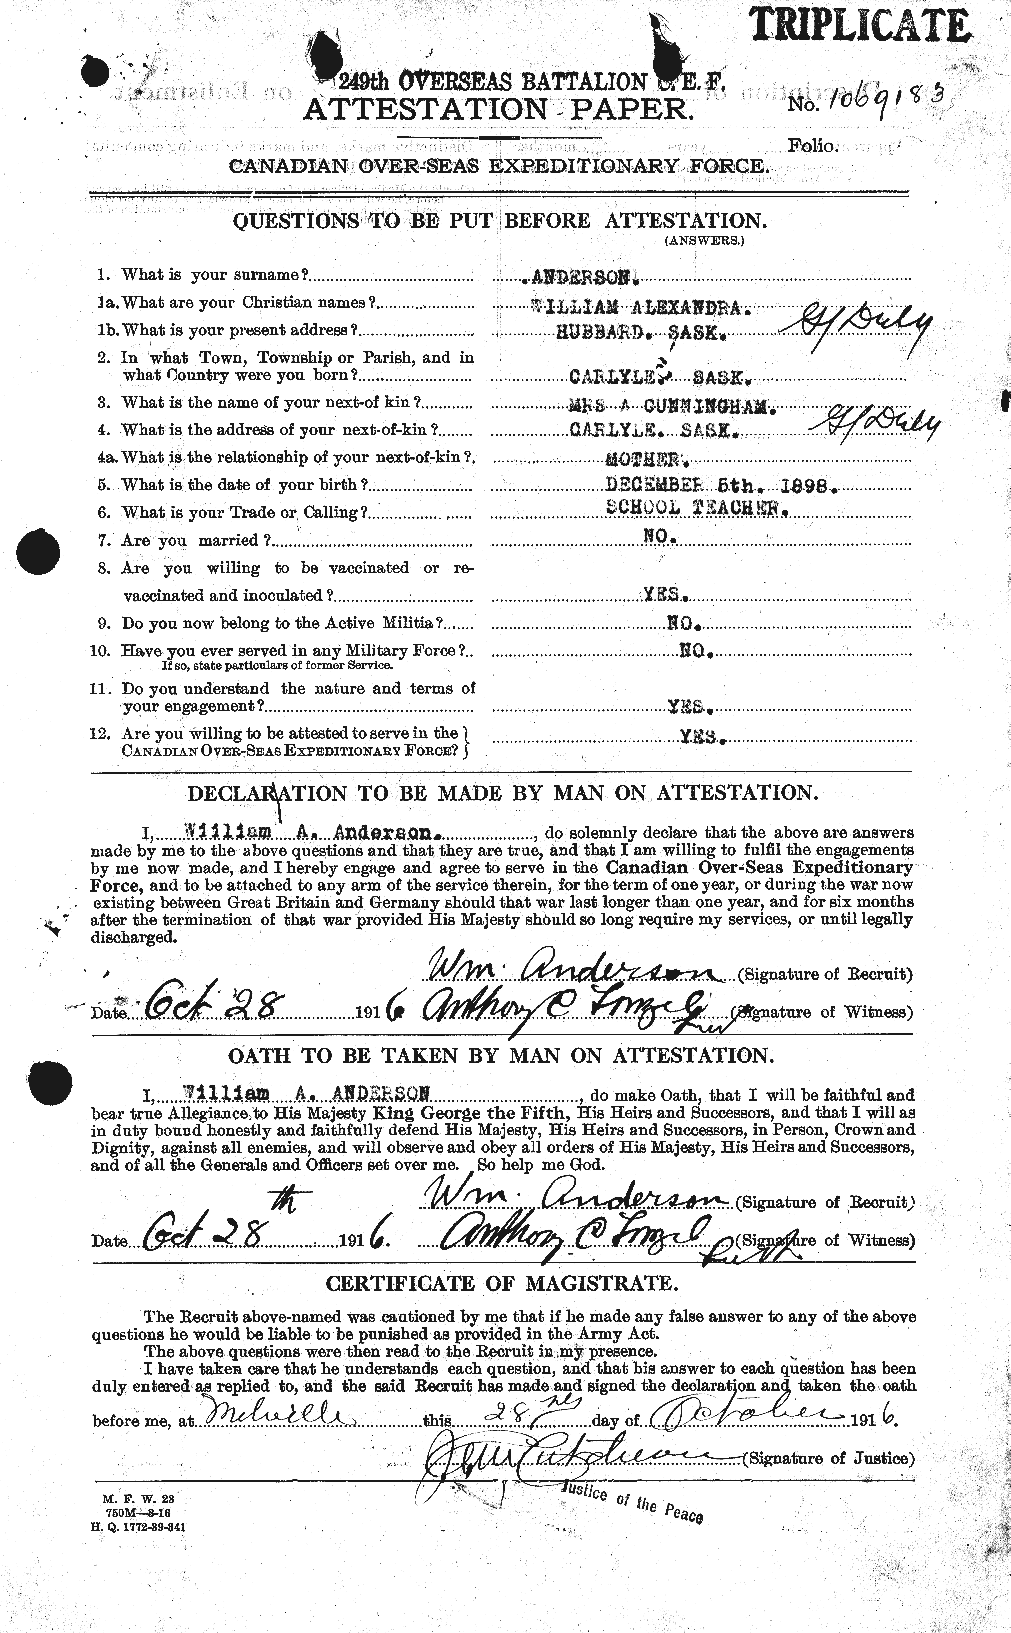 Personnel Records of the First World War - CEF 210774a